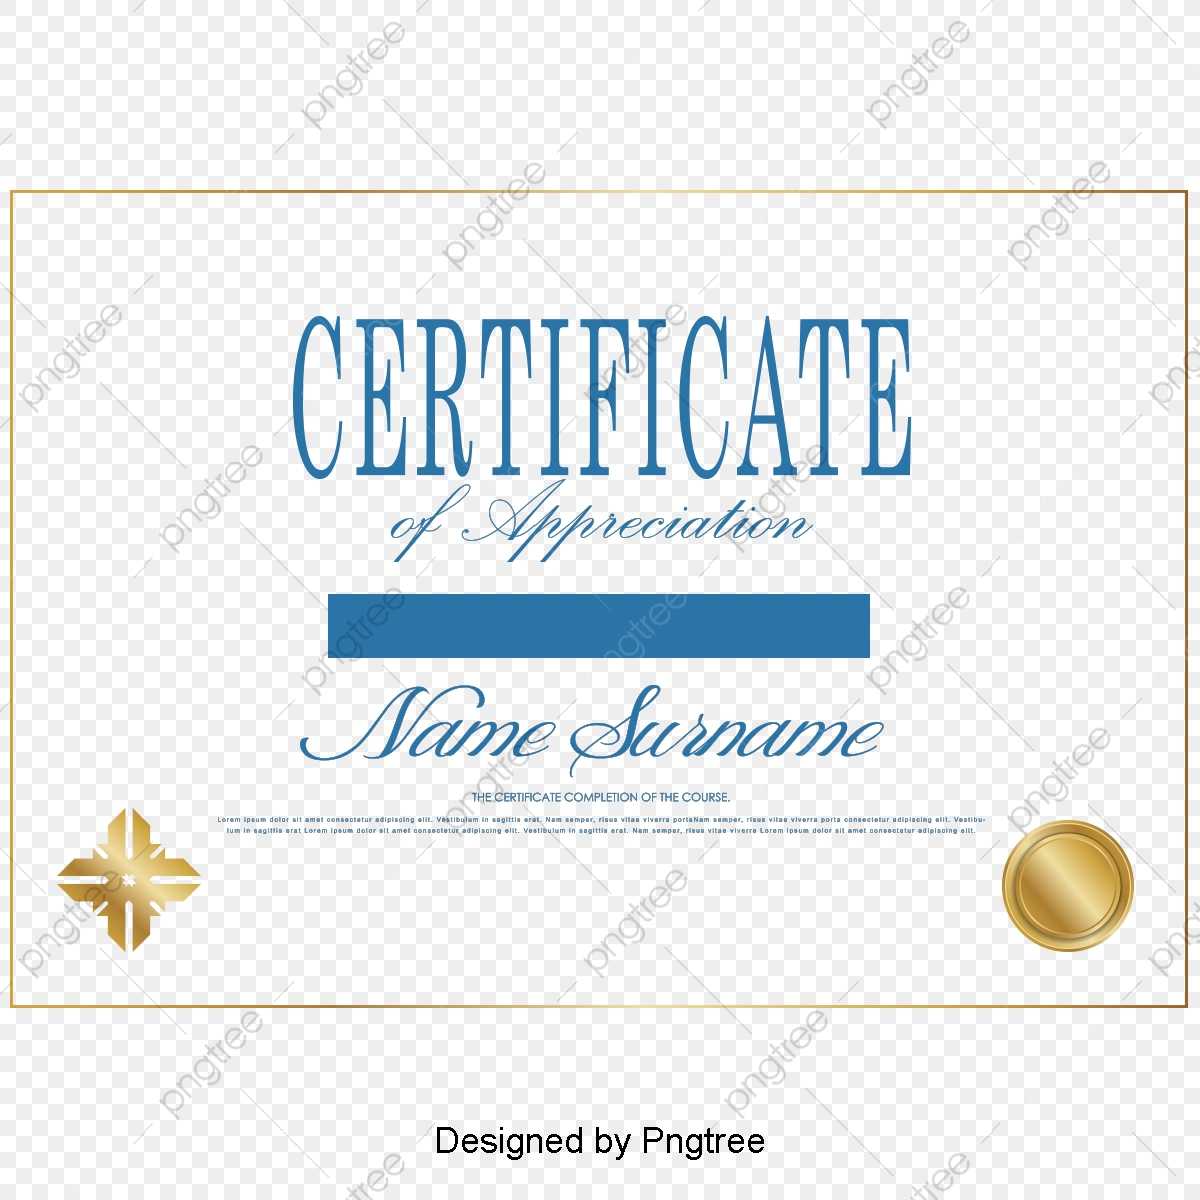 Simple Certificate Certificates Design Vector Material With Update Certificates That Use Certificate Templates